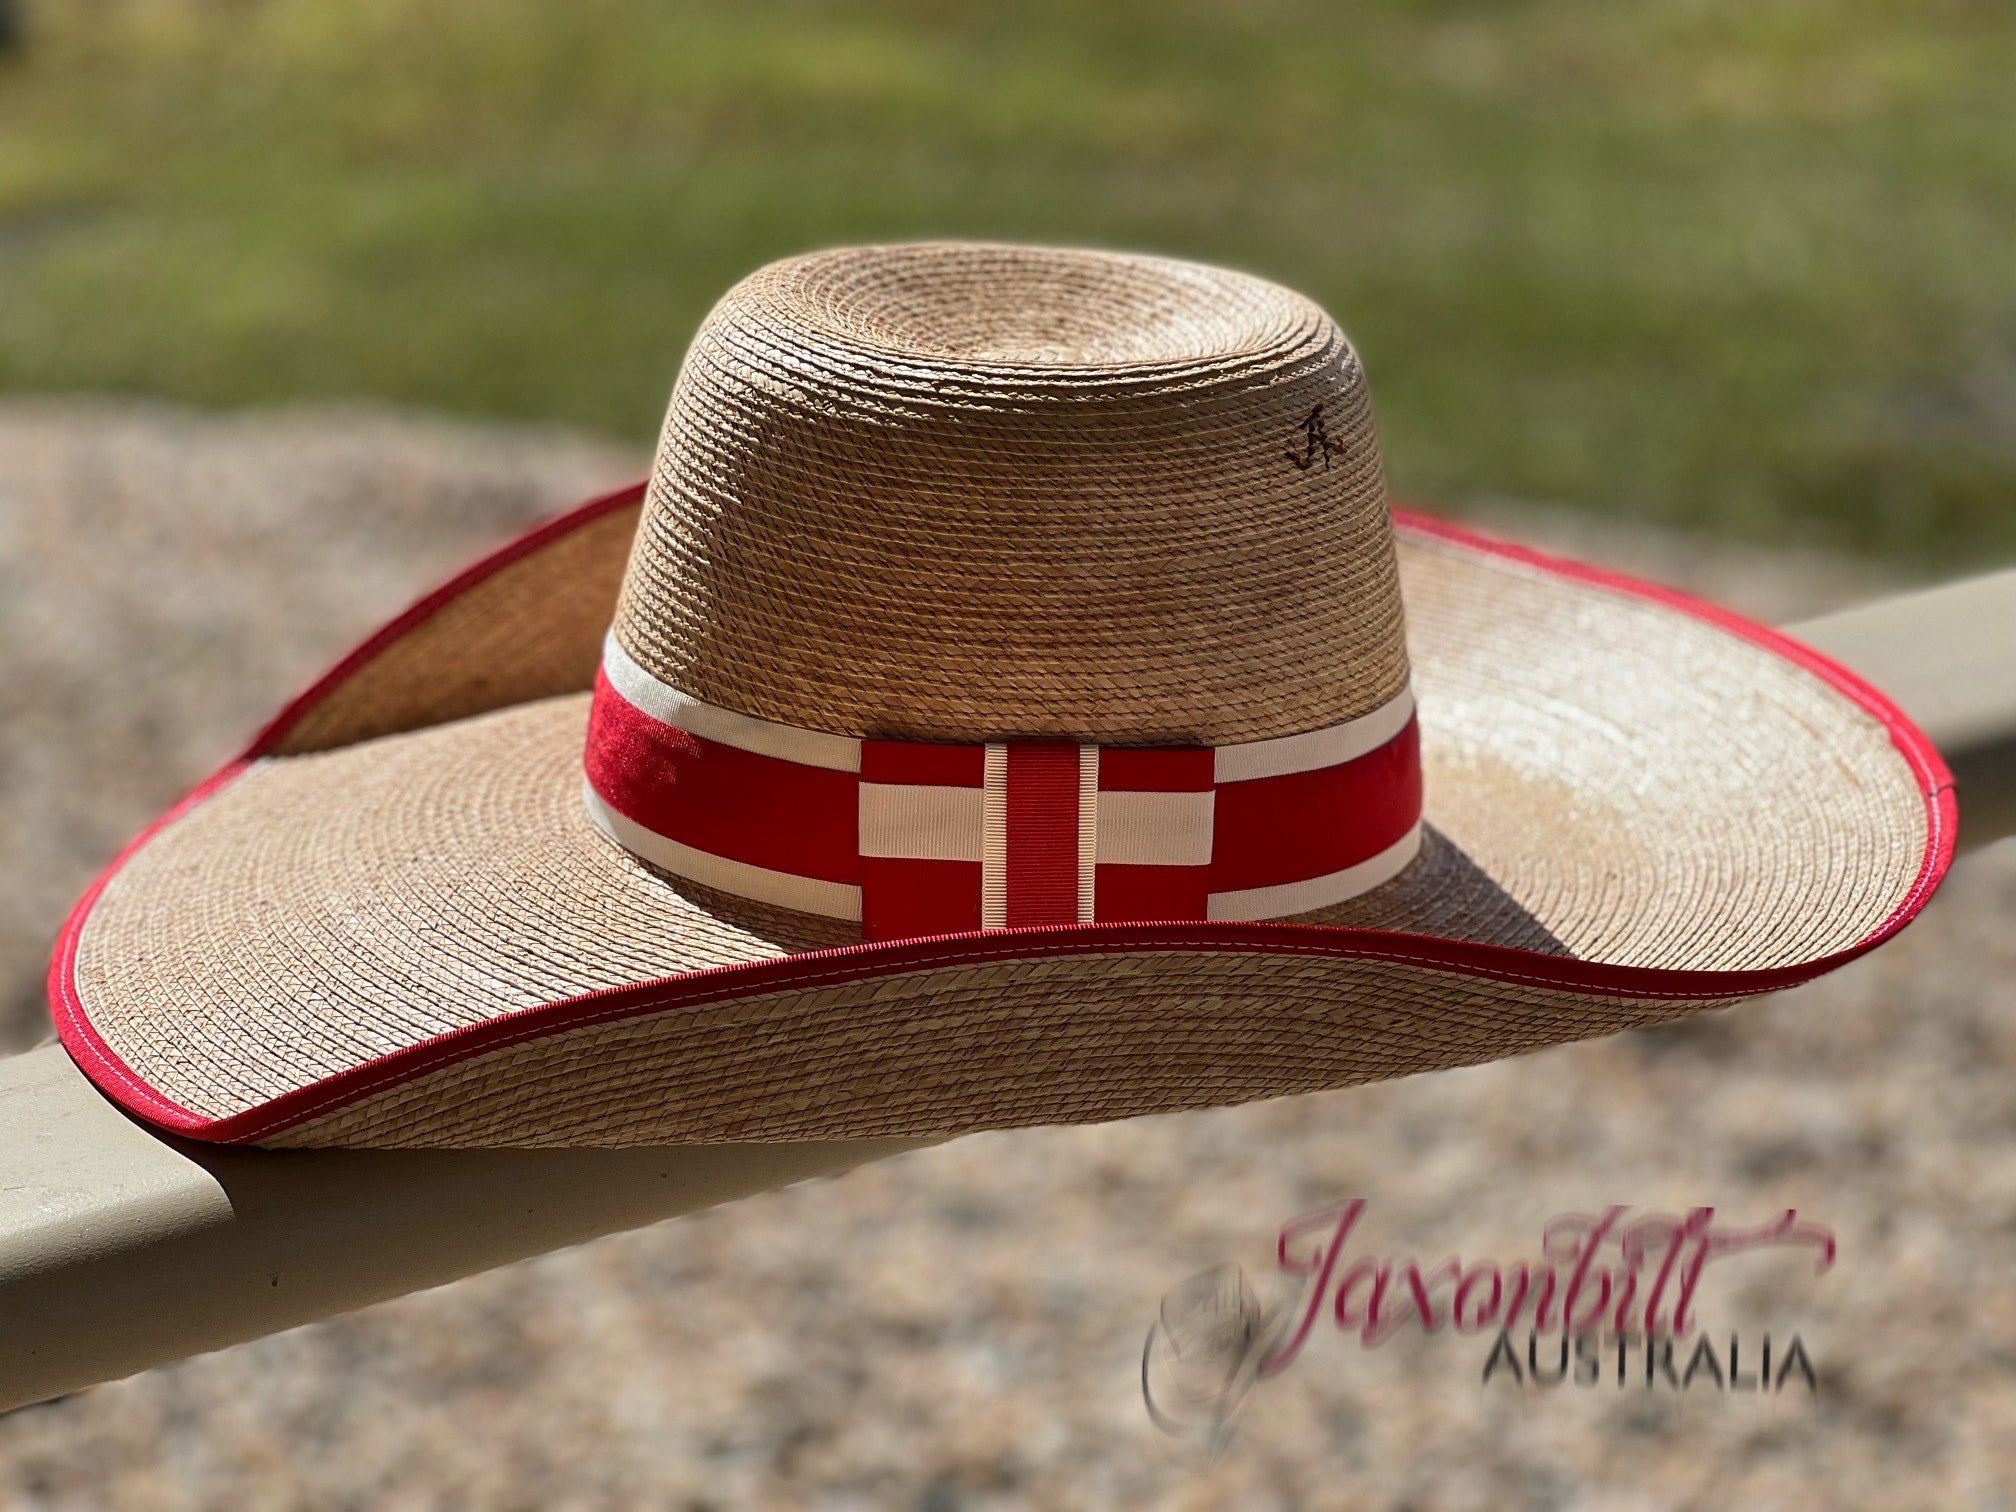 Jaxonbilt_Hats_are_Australian_made_palm_leaf_hats_and_crossbred_hats_for_cowgirls_and_cowboys_with_wide_brims_for_sun_protection_5”_brim_trim_on_edge_wide_crown_band_cool_hand_luke_shape_dark_oak_palm